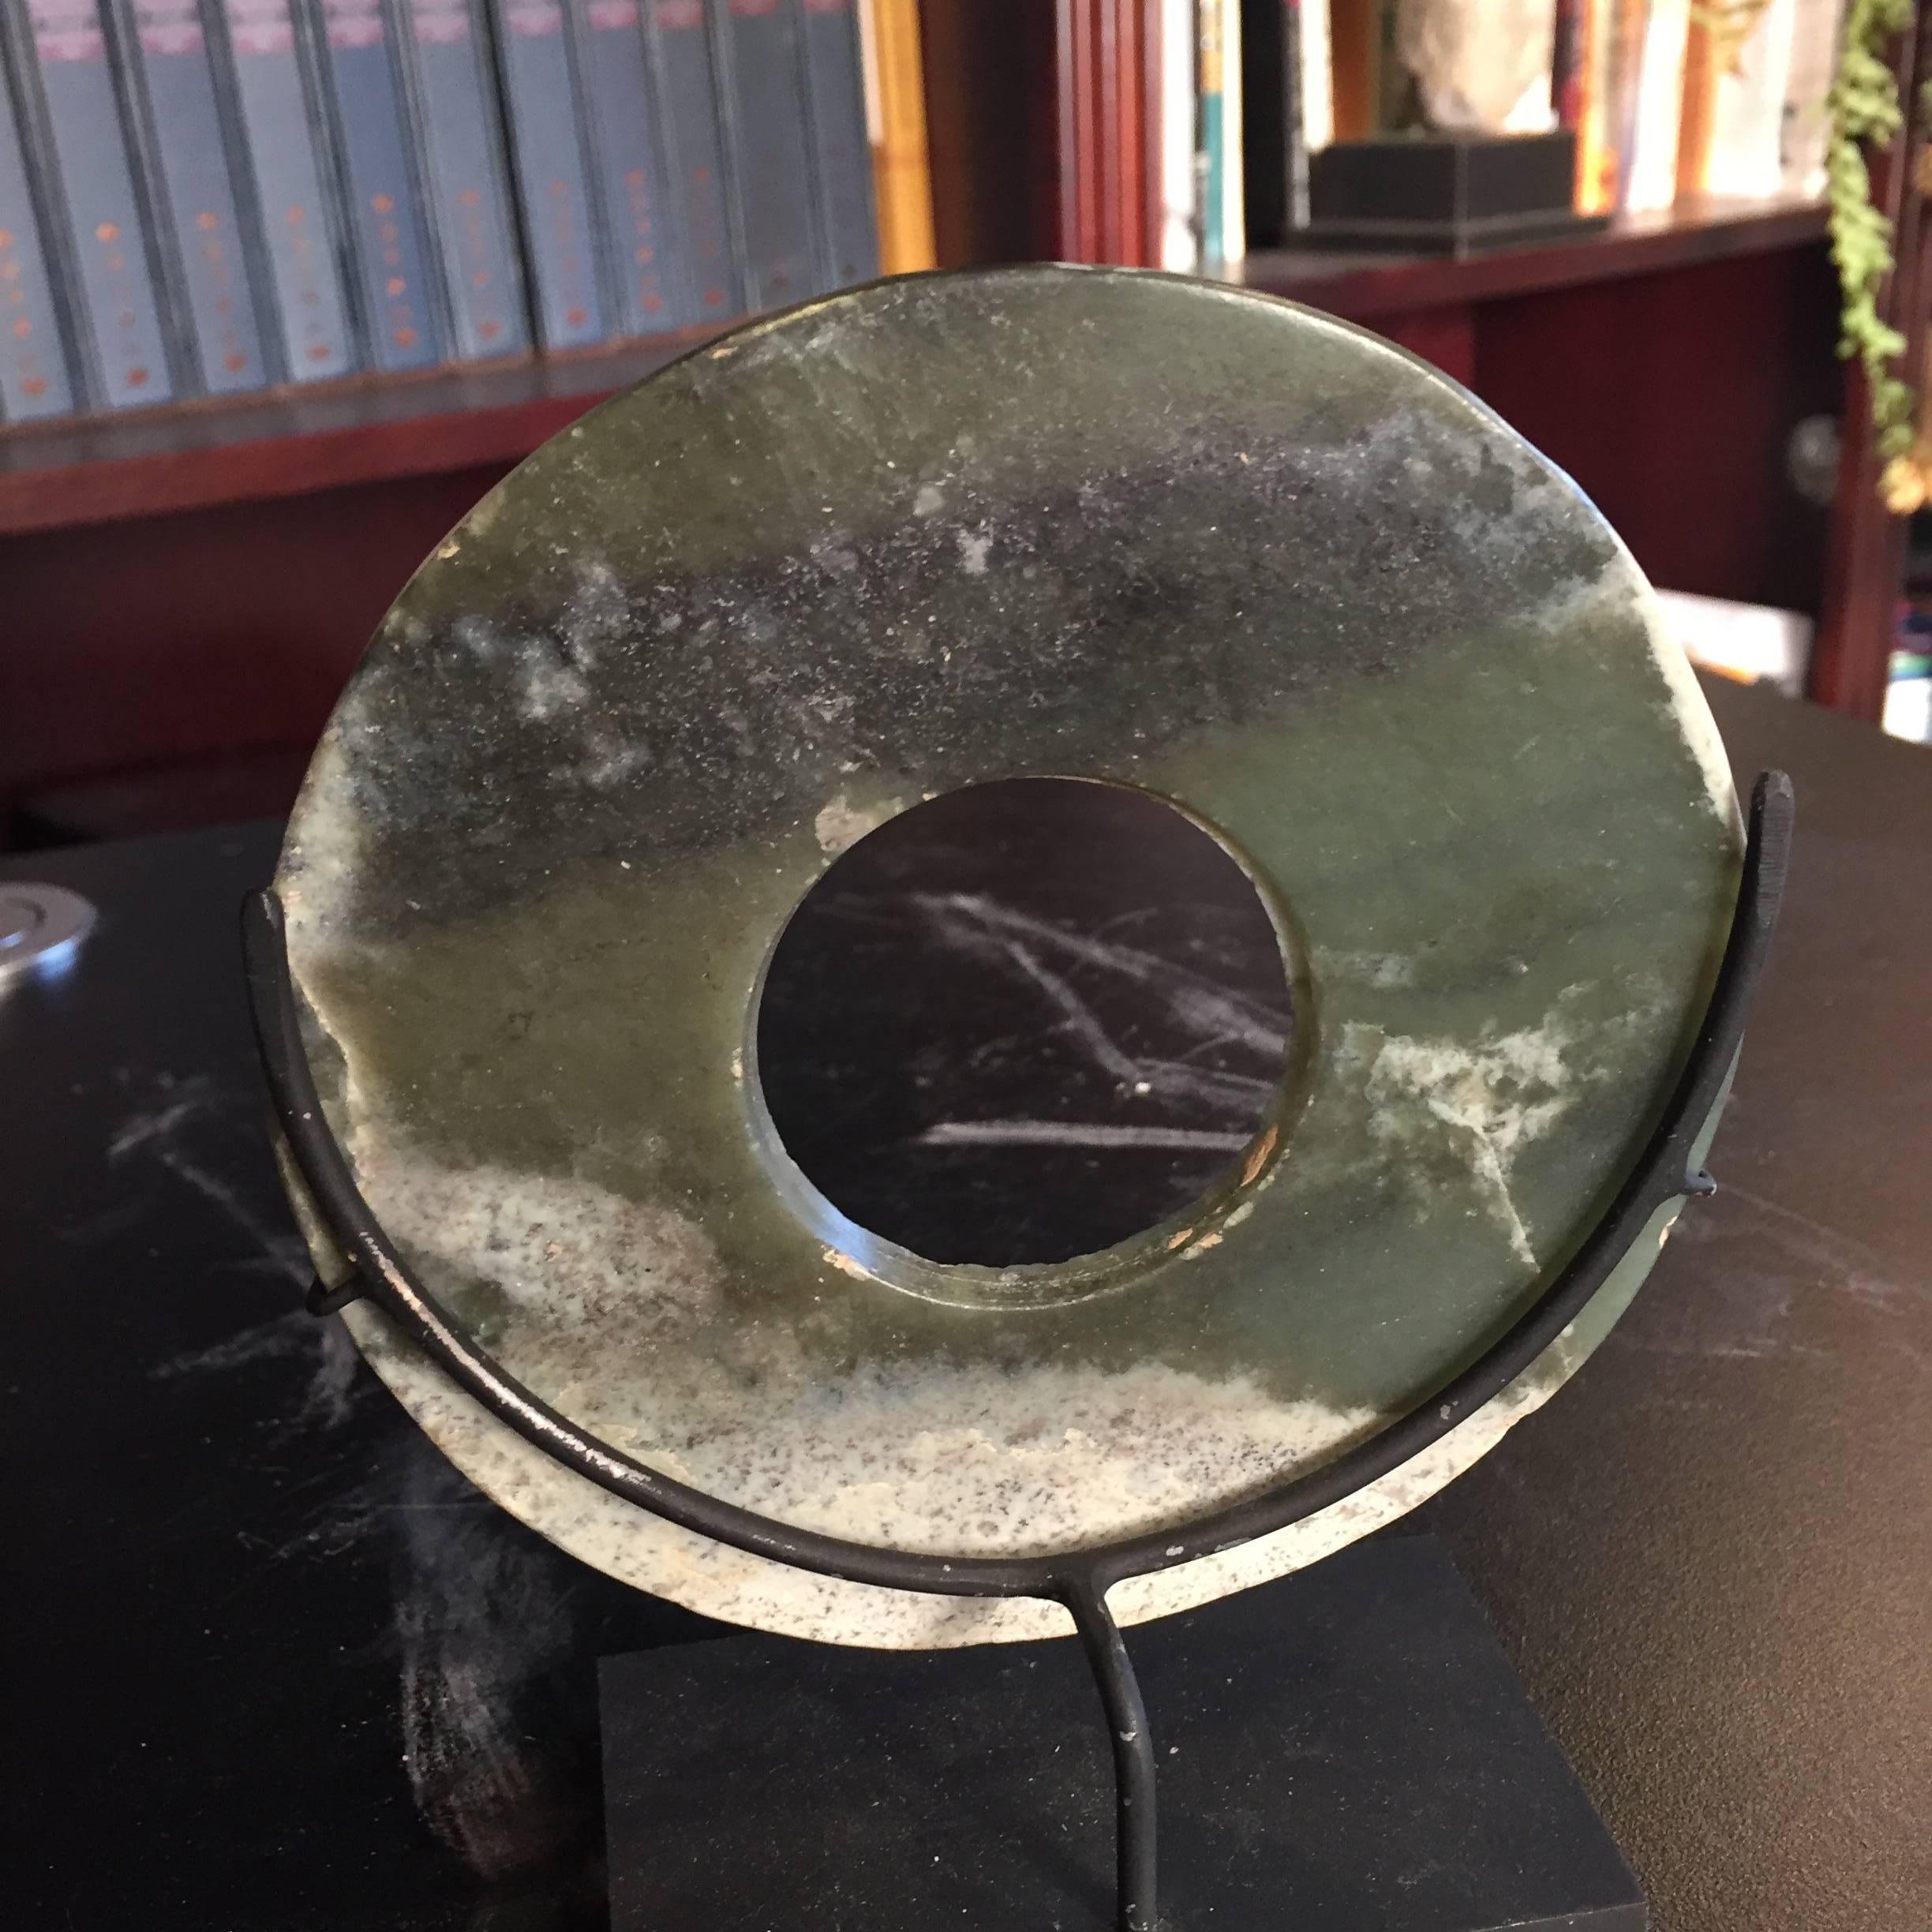 Chinese Authentic Jade Bi Disc from Ancient China 4000 Years Old